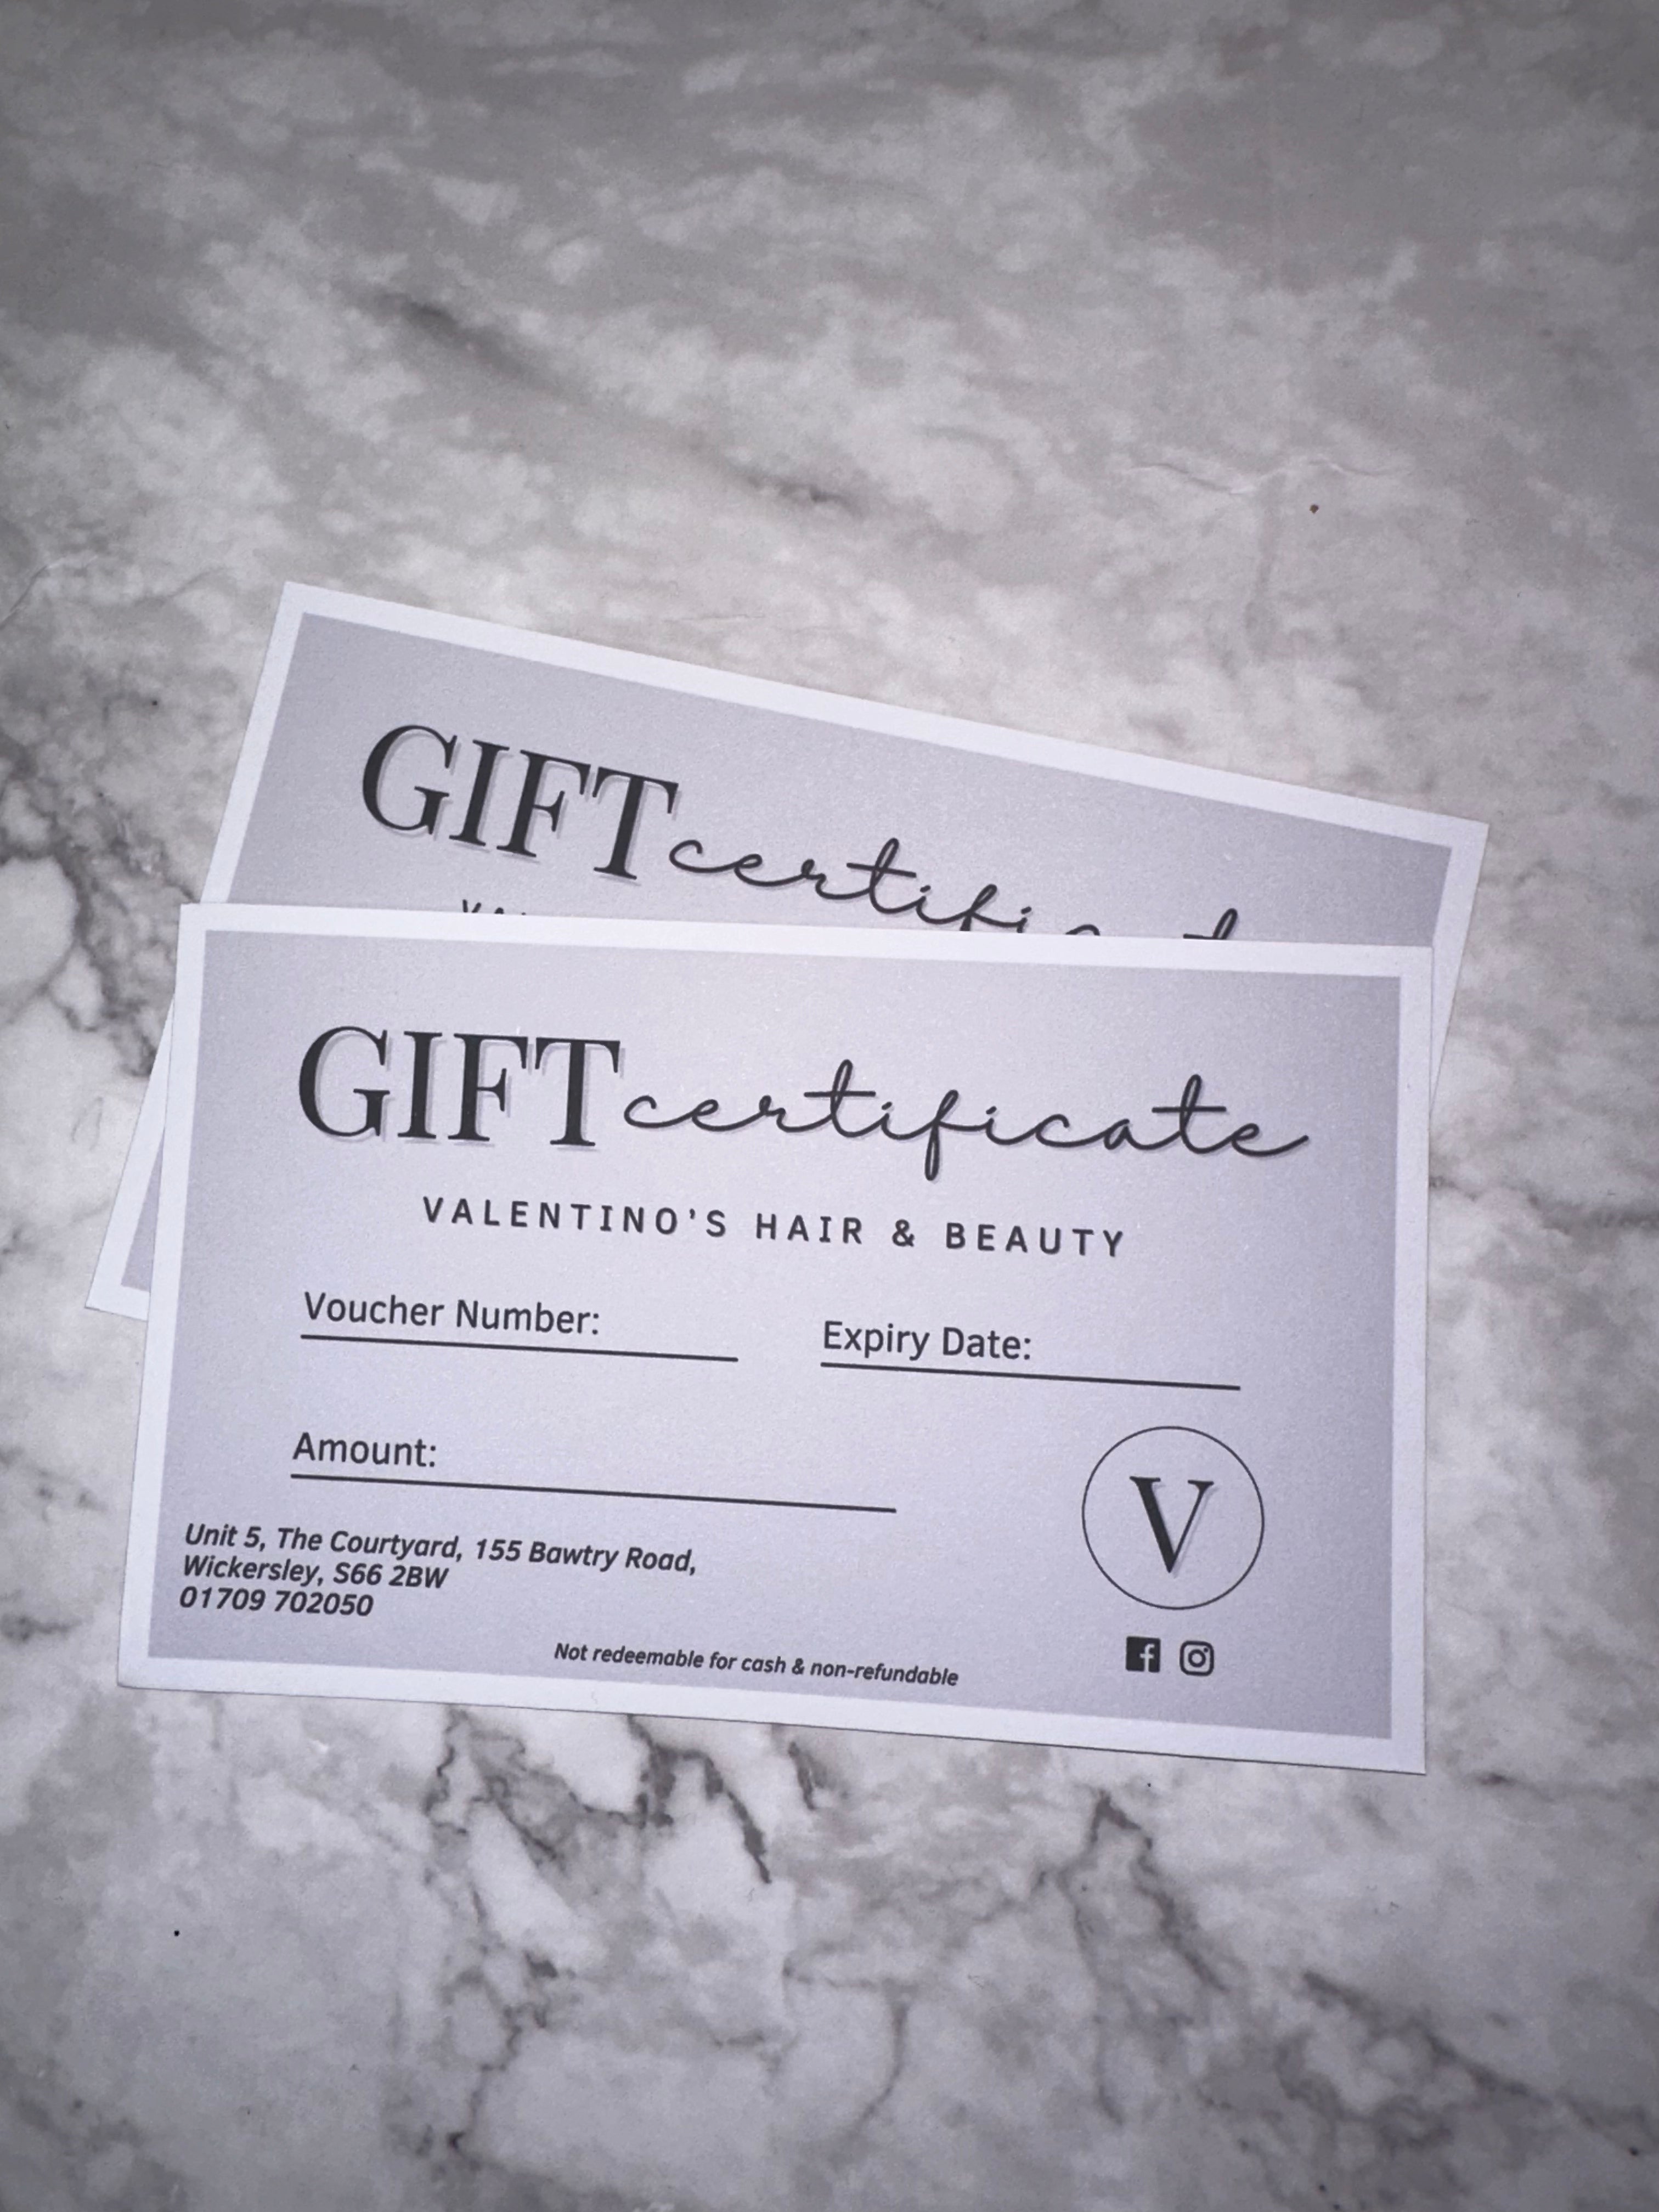 Gift Vouchers - The Courtyard